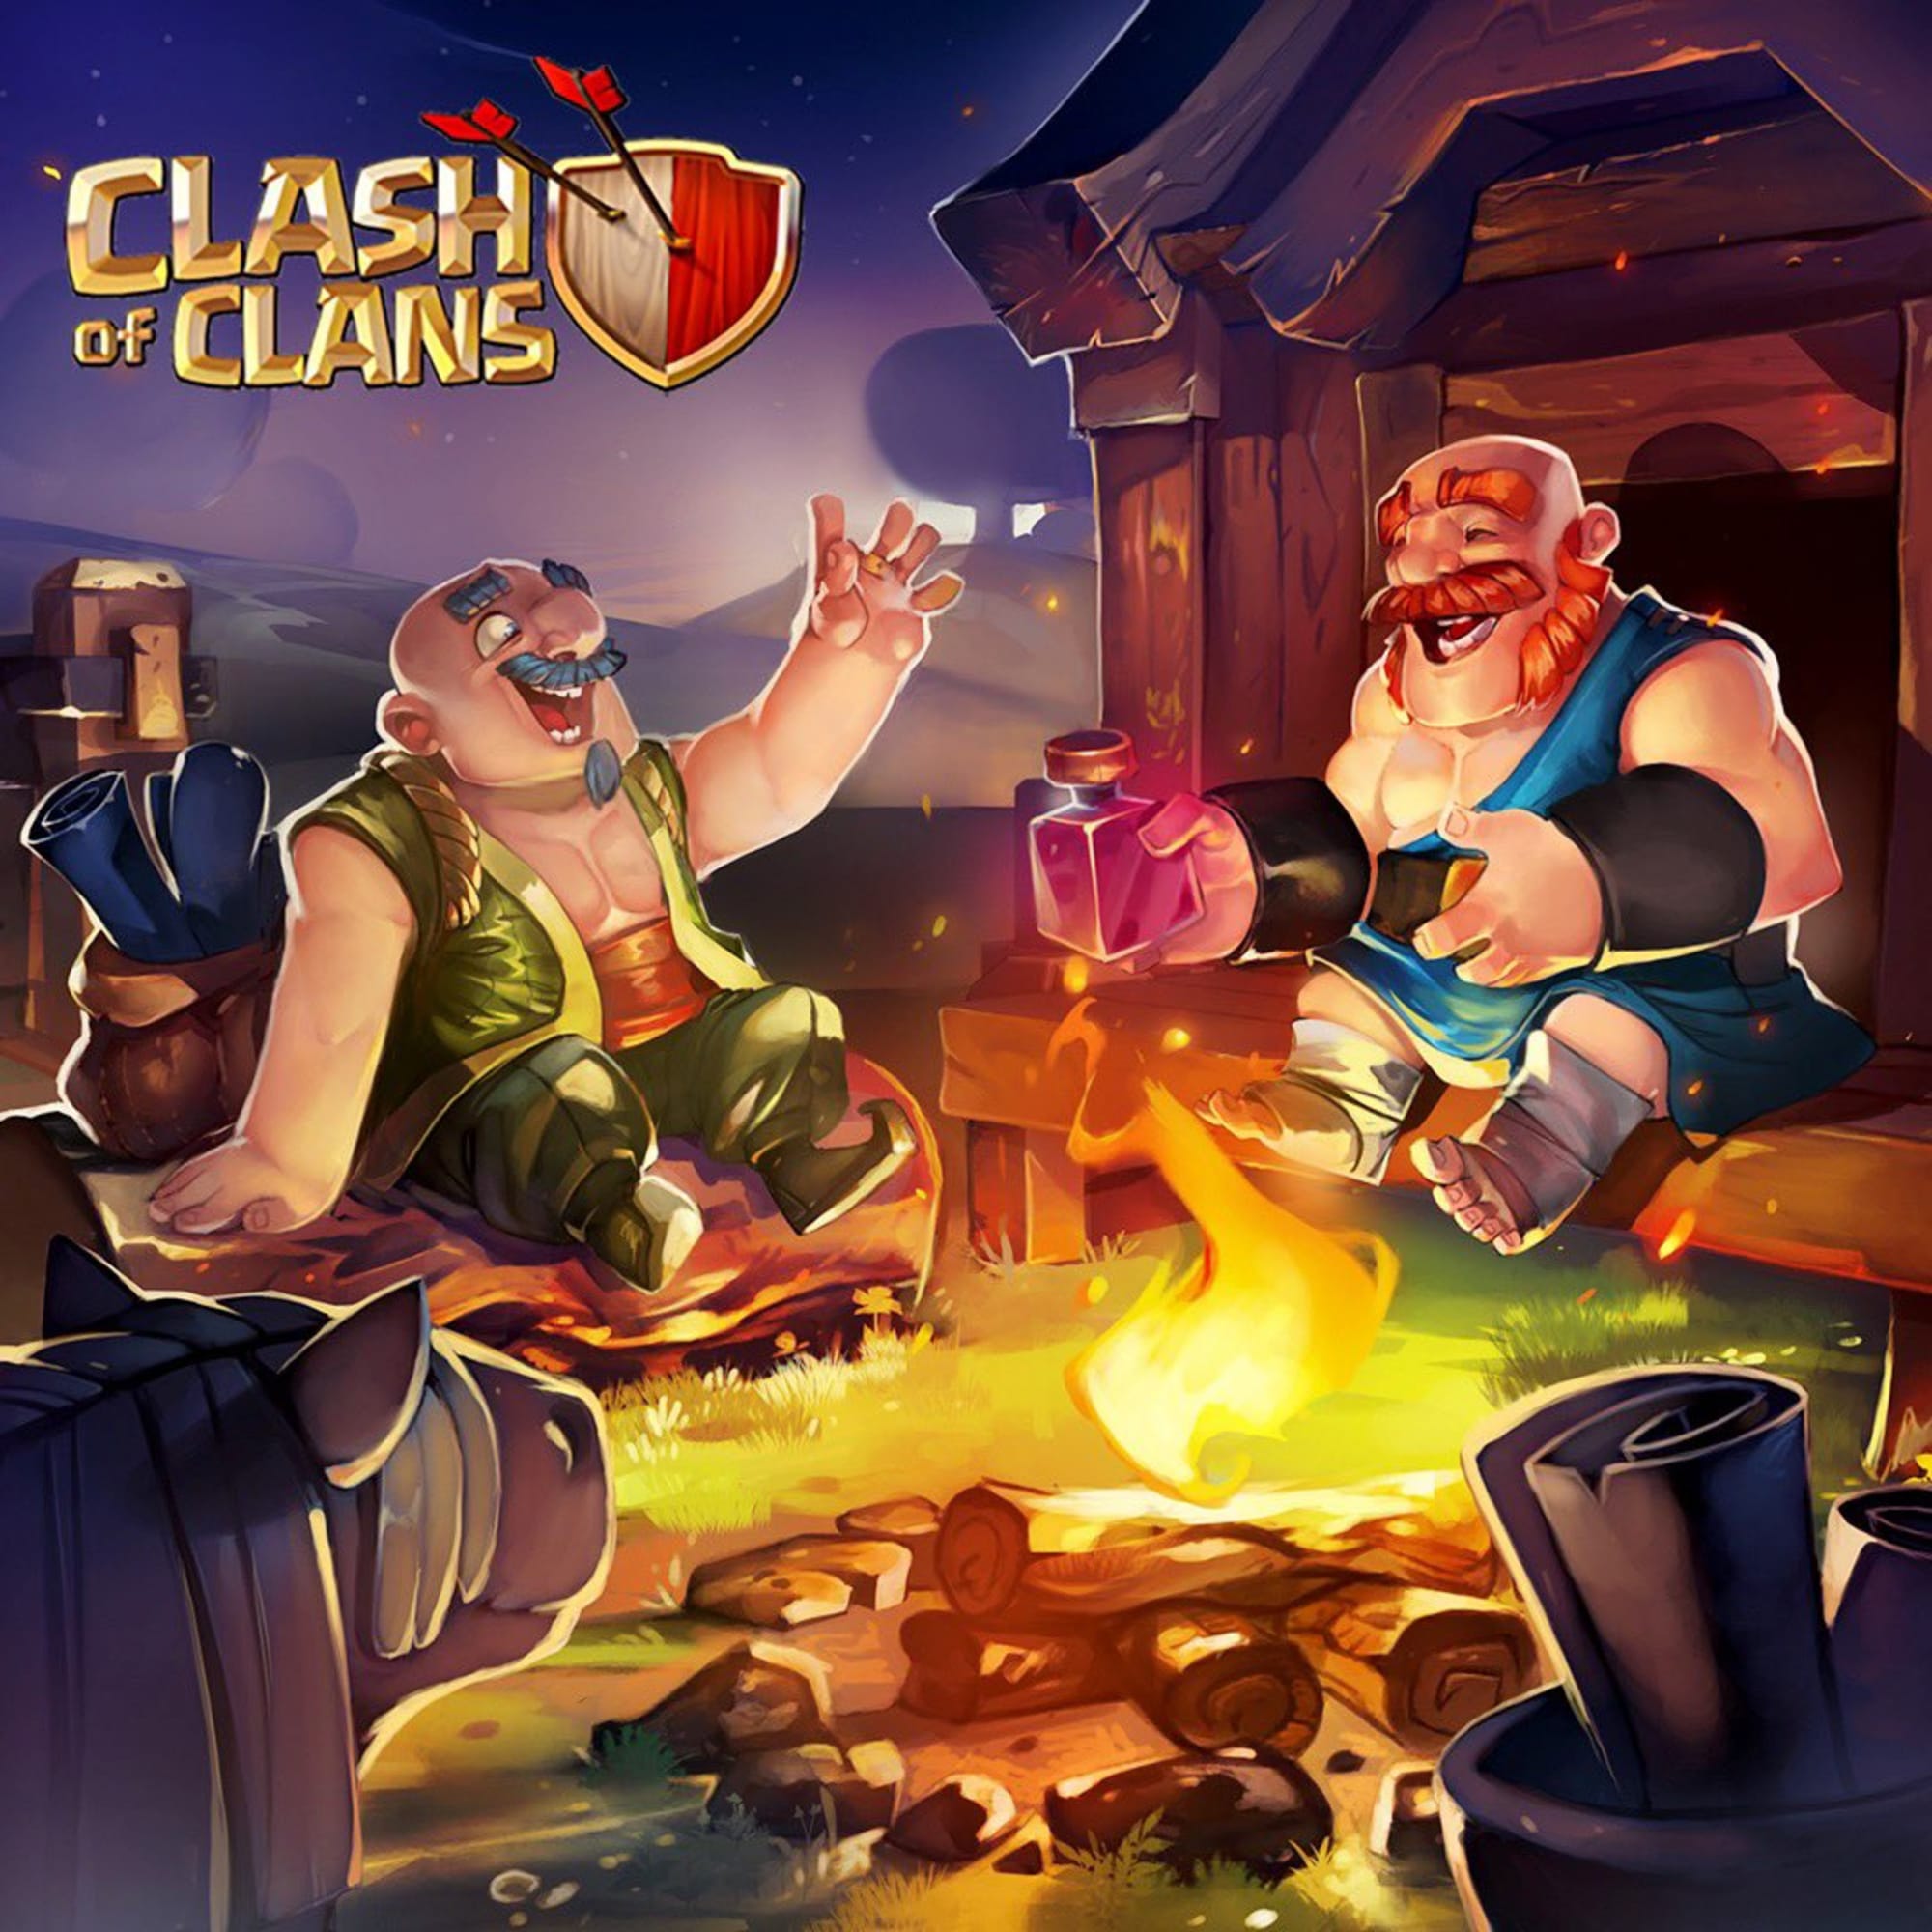 laughing characters in clash of clans mod apk